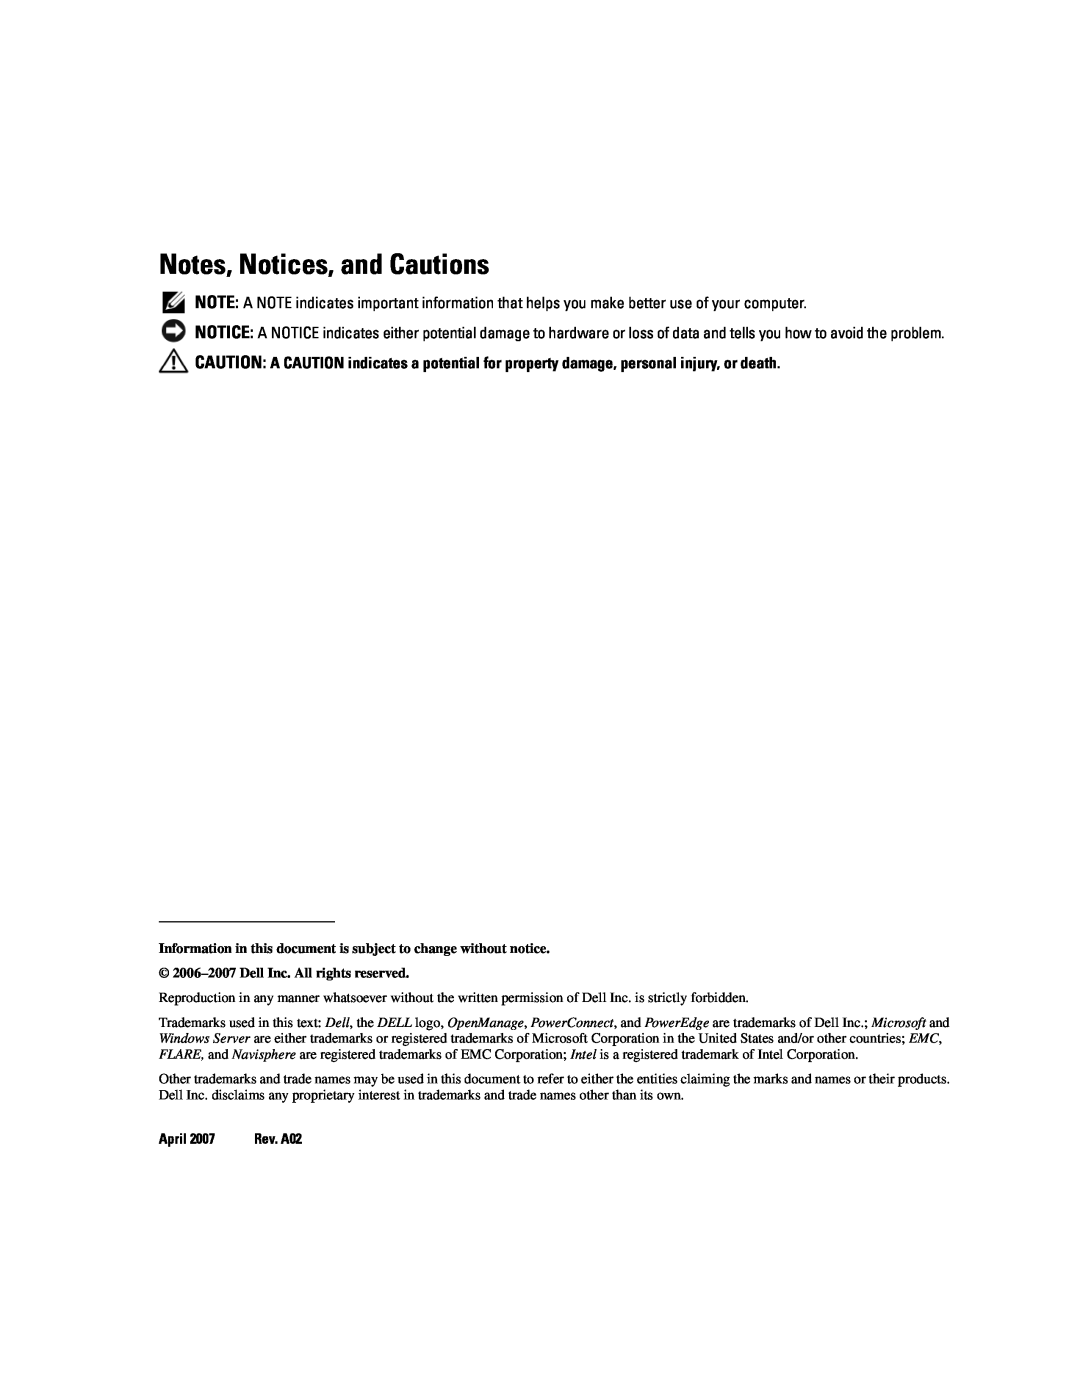 Dell FE655WI manual Notes, Notices, and Cautions, Information in this document is subject to change without notice 